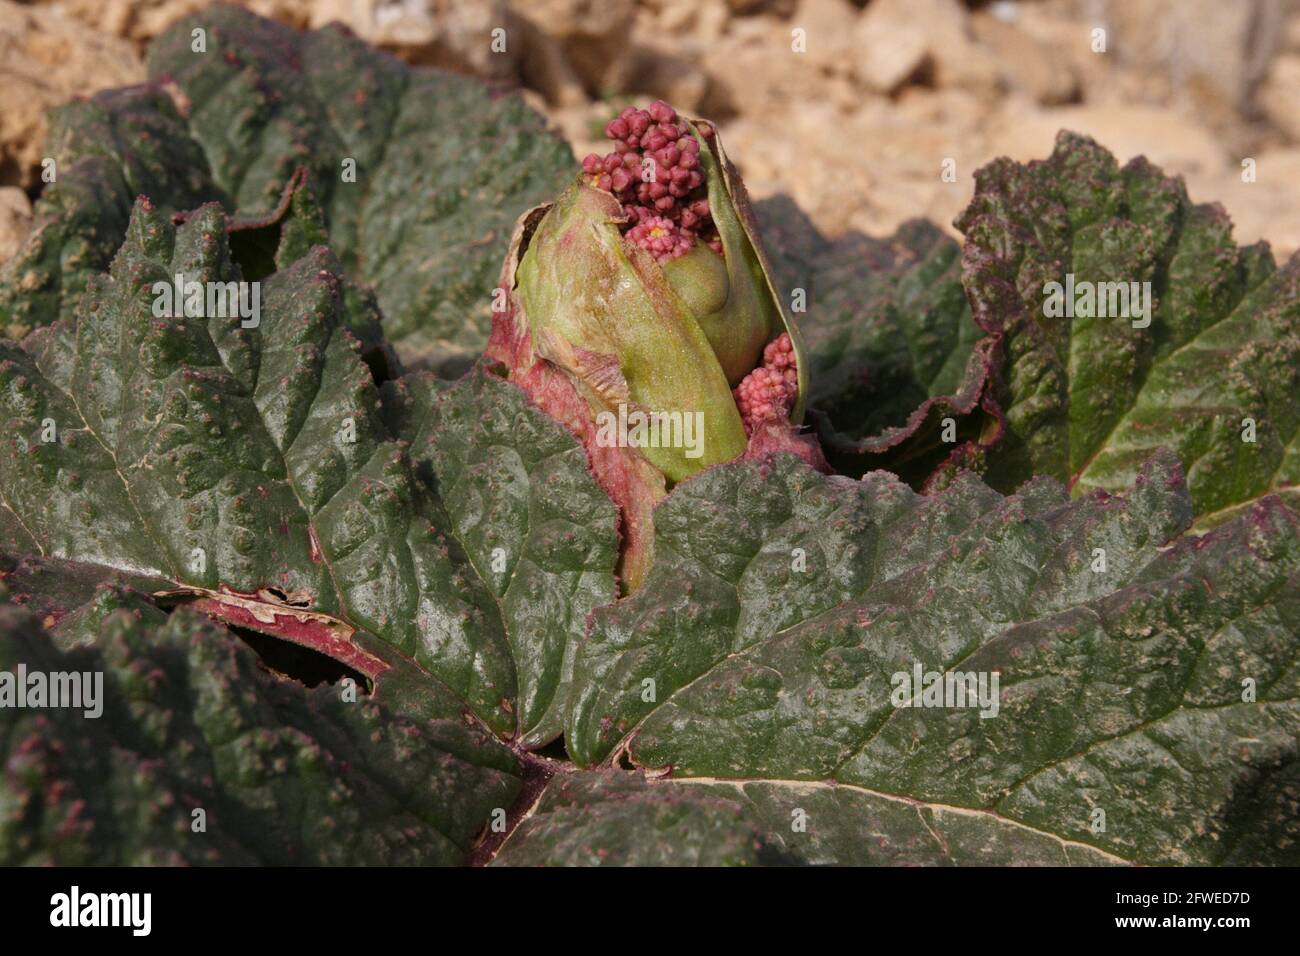 Desert Rhubarb or Rheum Palaestinum endangered plant from the Polygonaceae family, parts of the plant are edible others have therapeutic uses, Negev. Stock Photo